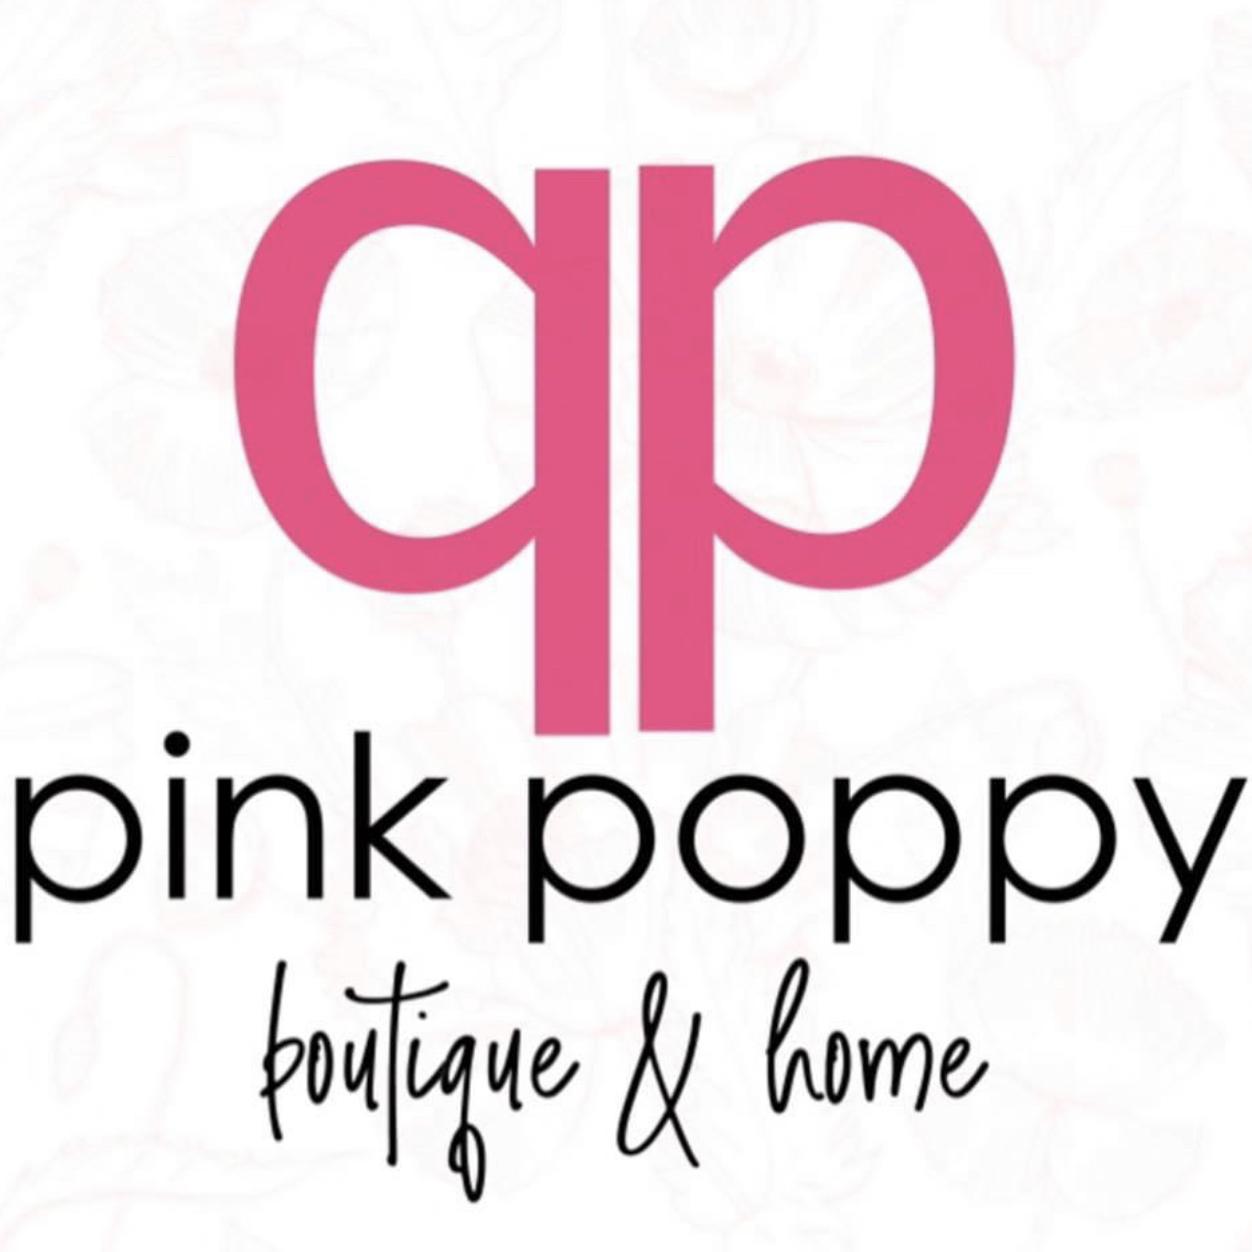 Pink Poppy 's images